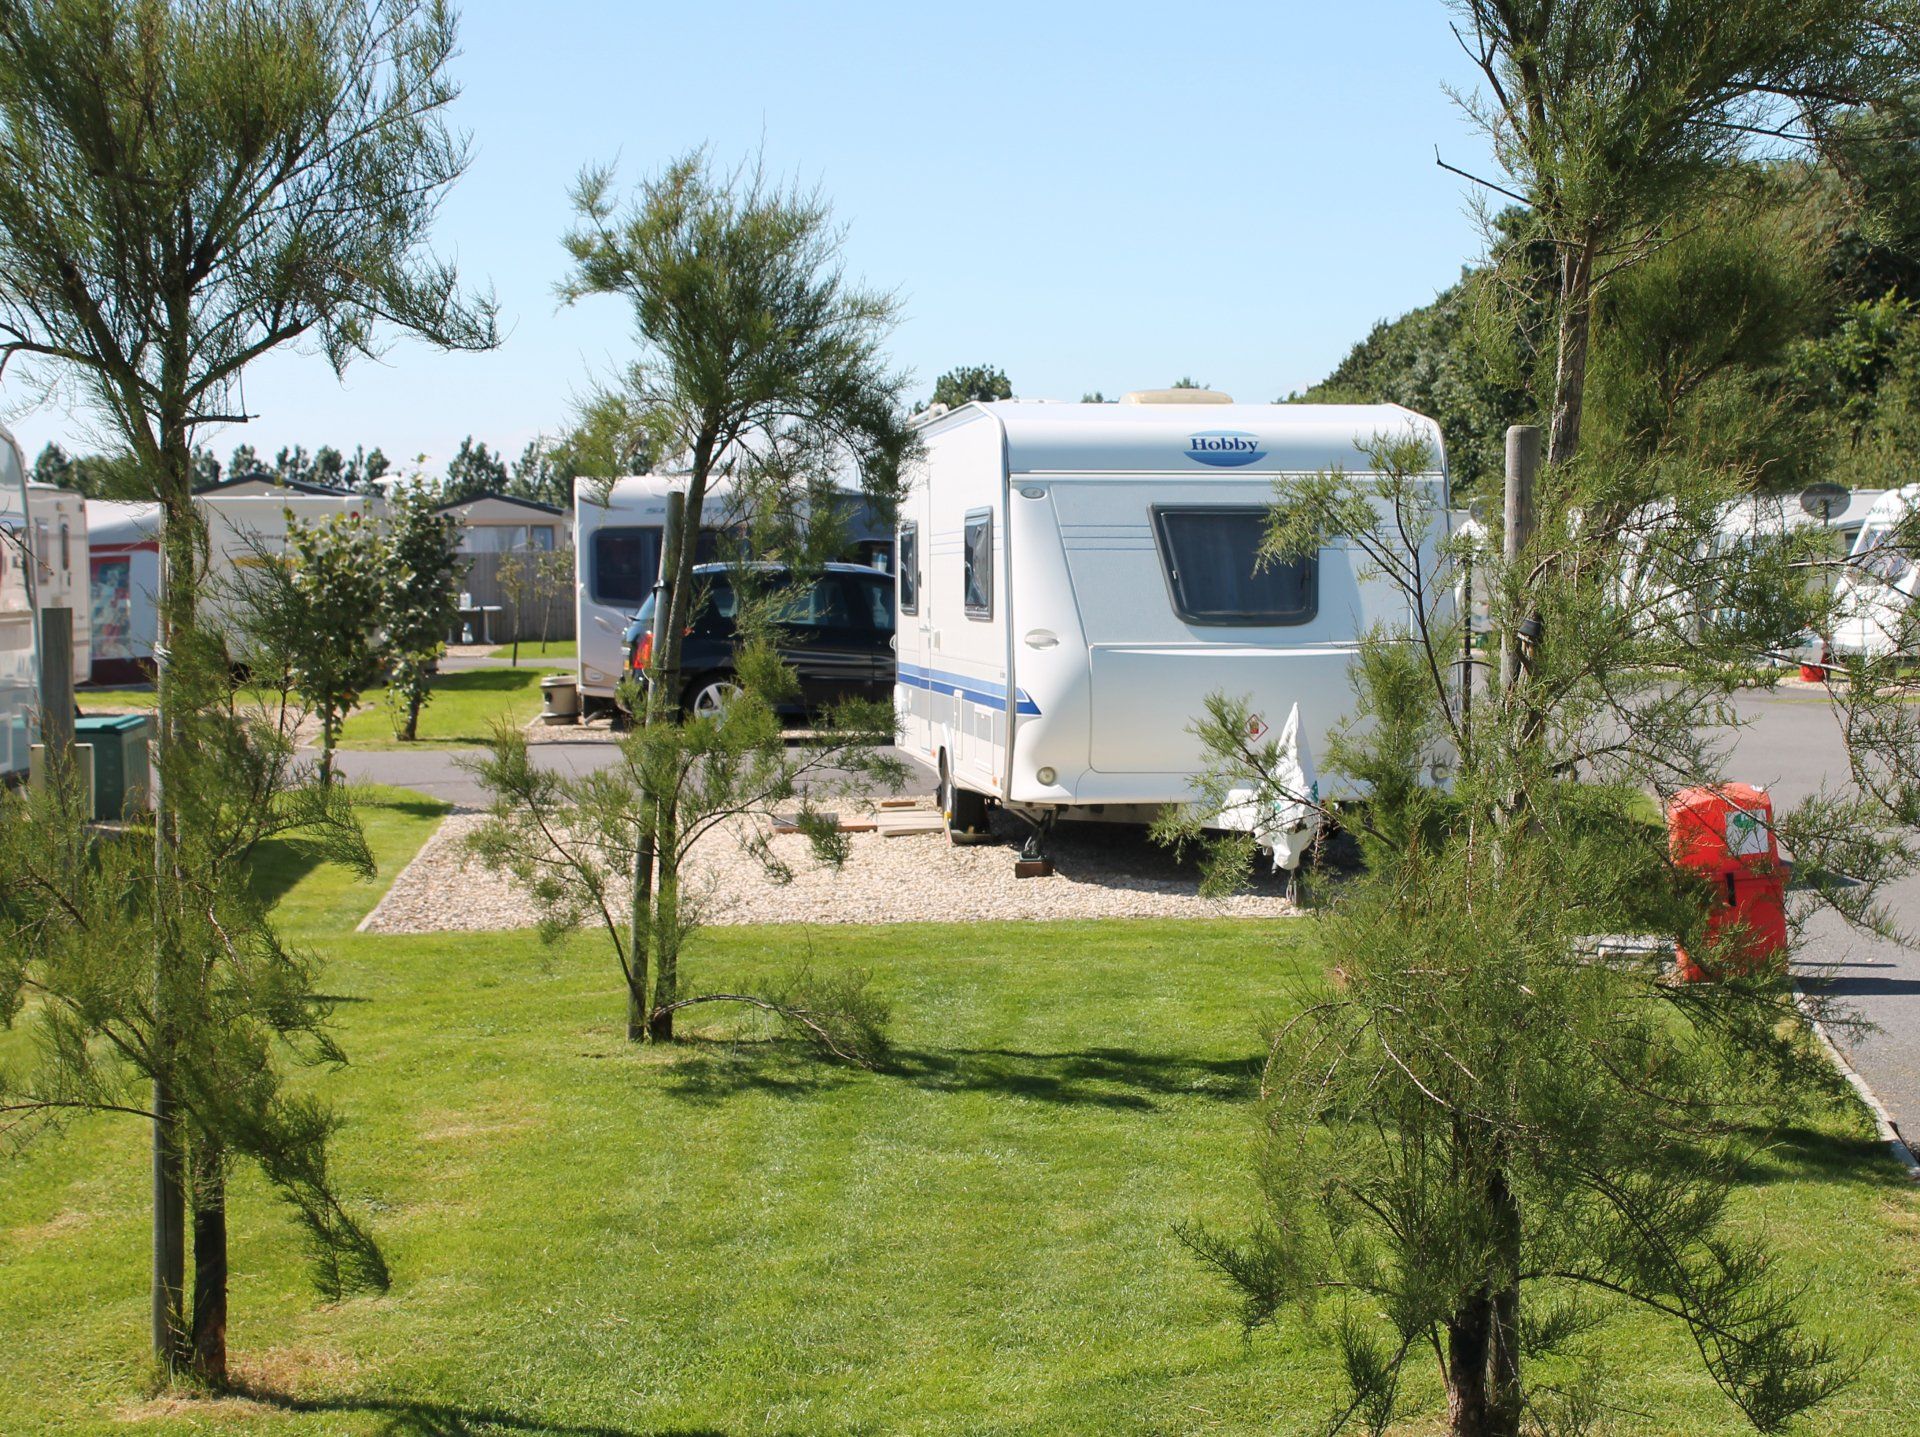 Caravans in Static Touring Pitches by Newly Planted Trees